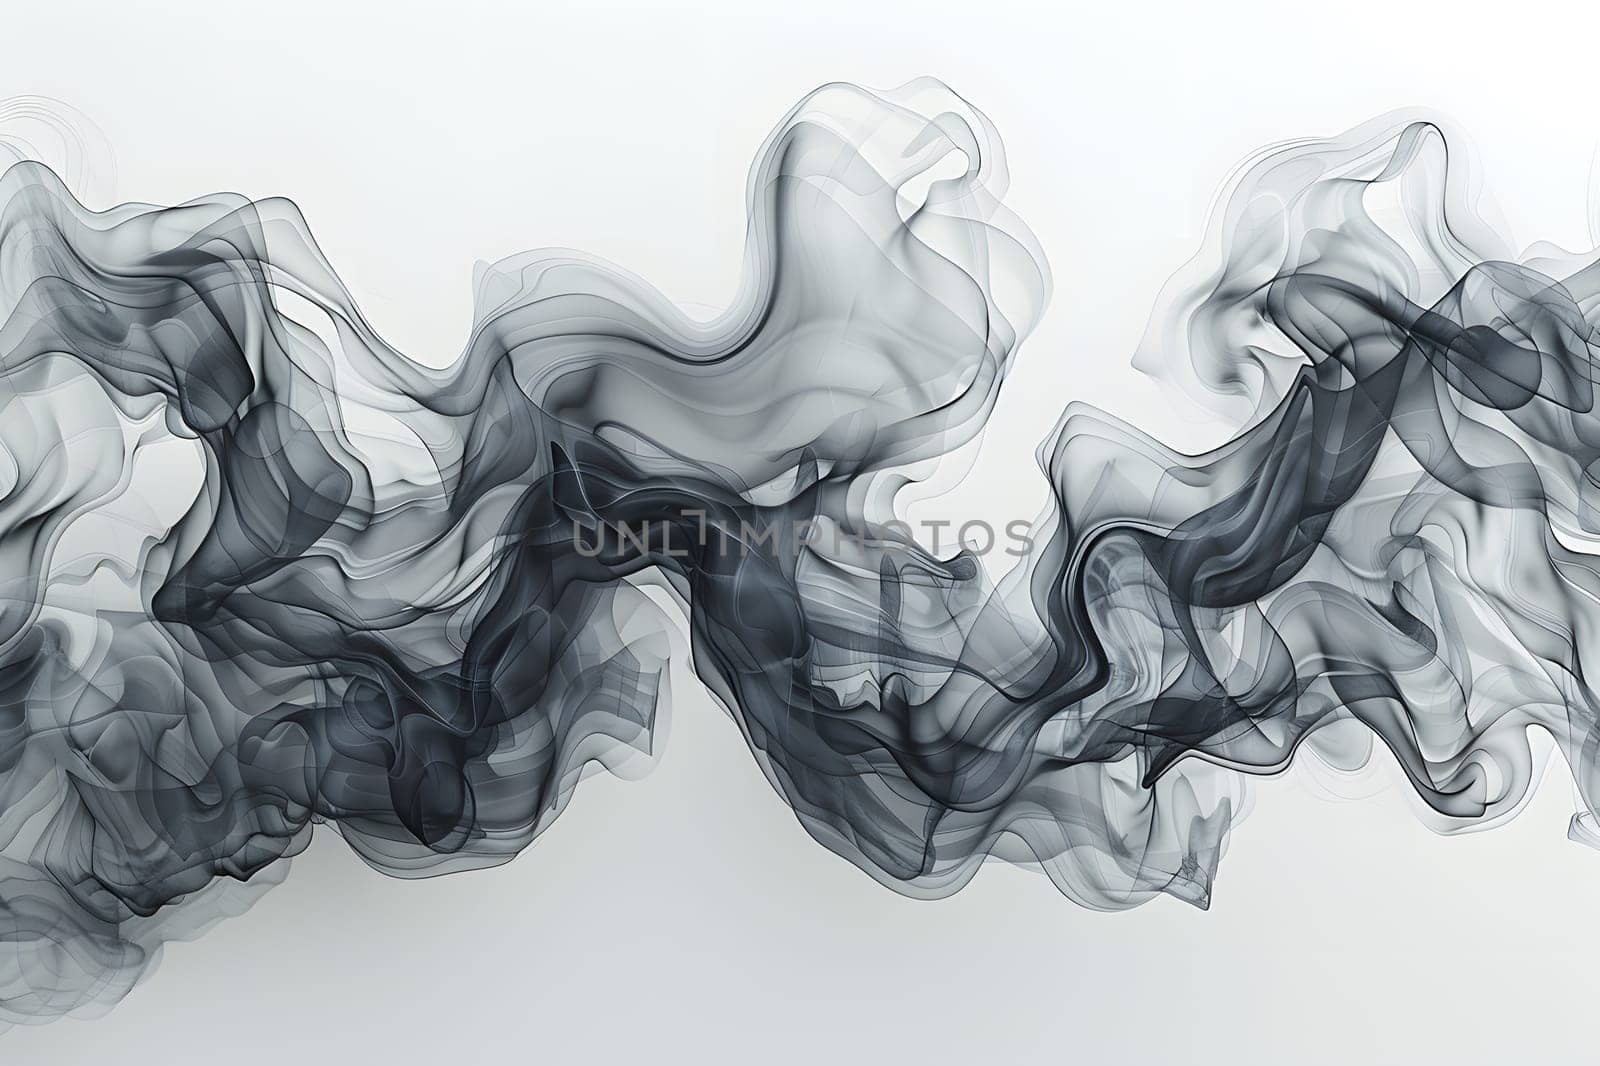 A closeup illustration capturing the beauty of swirling smoke against a monochrome white background, showcasing the artistry of visual arts and pattern design